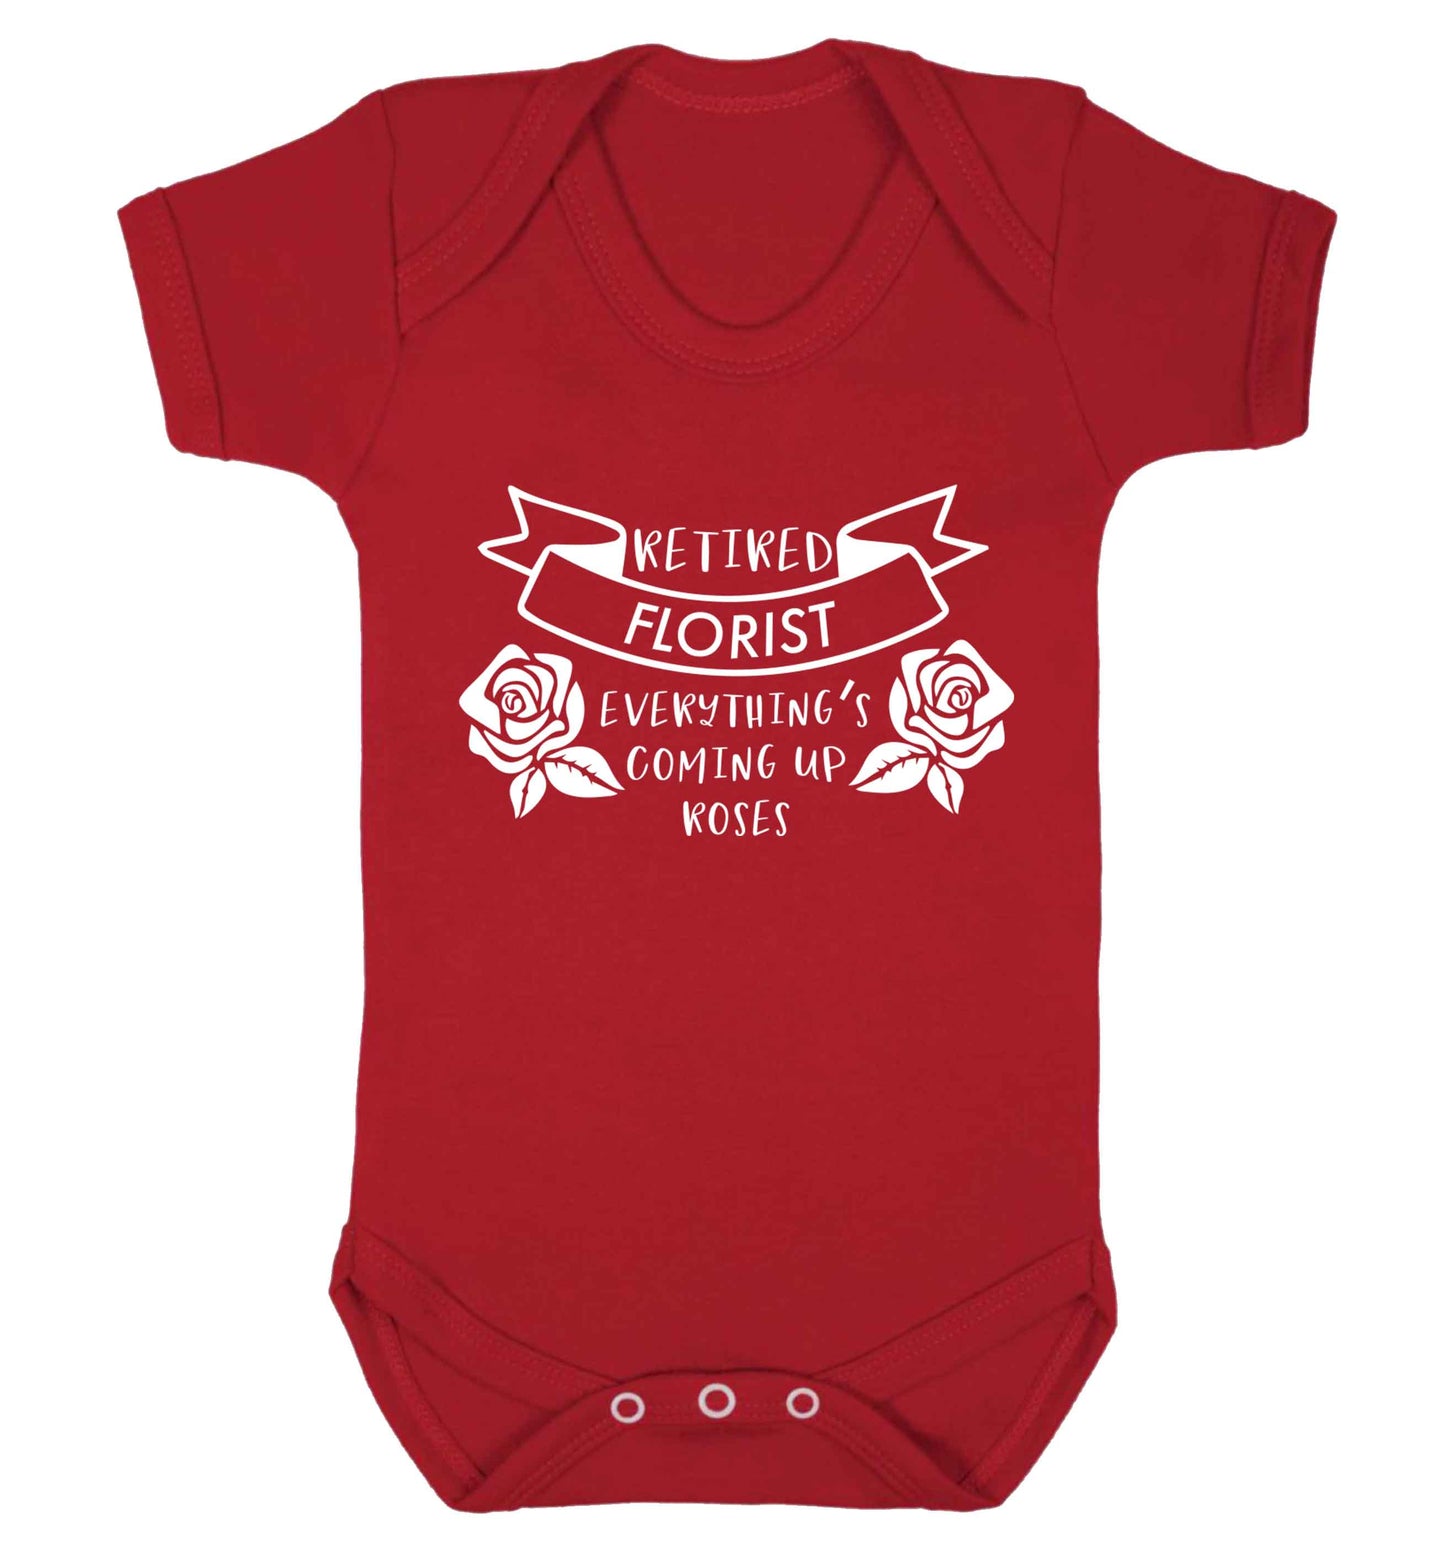 Retired florist everything's coming up roses Baby Vest red 18-24 months